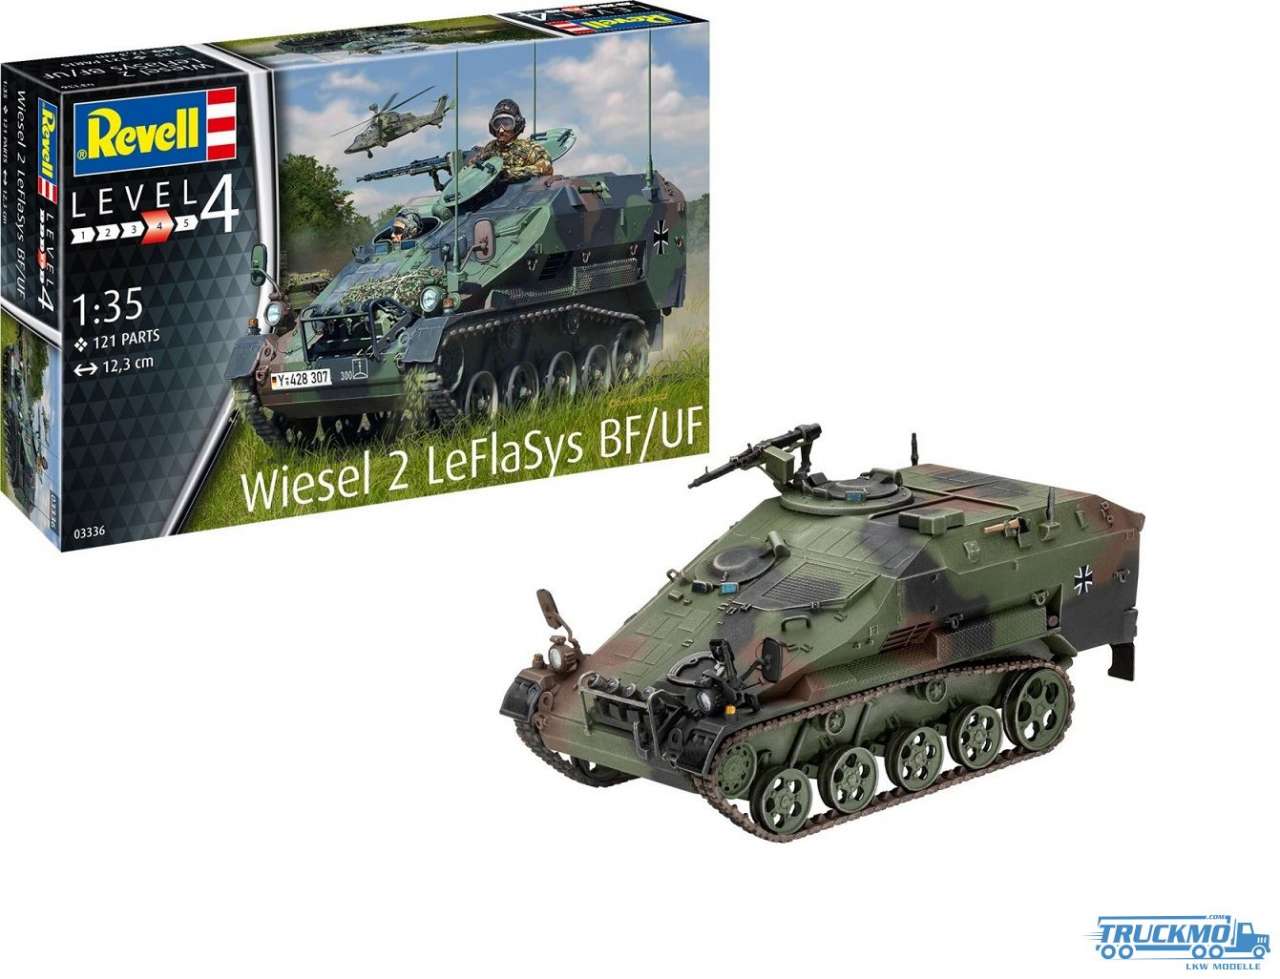 Revell Wiesel 2 LeFlaSys BF/UF 03336